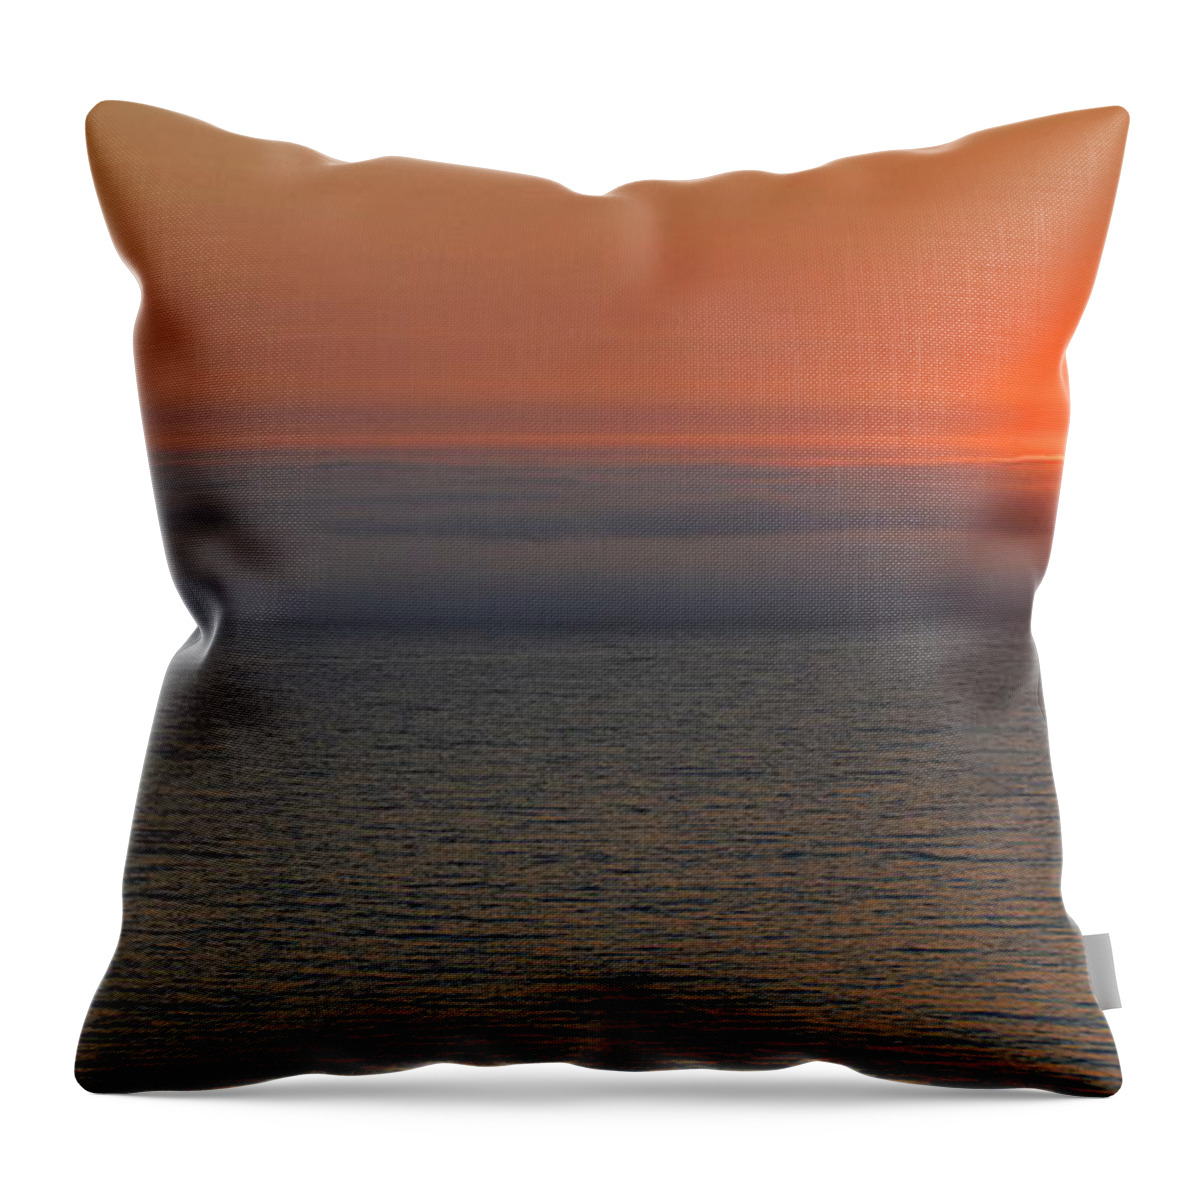 Sunset Throw Pillow featuring the photograph Sitting On The Edge by Glenn McCarthy Art and Photography